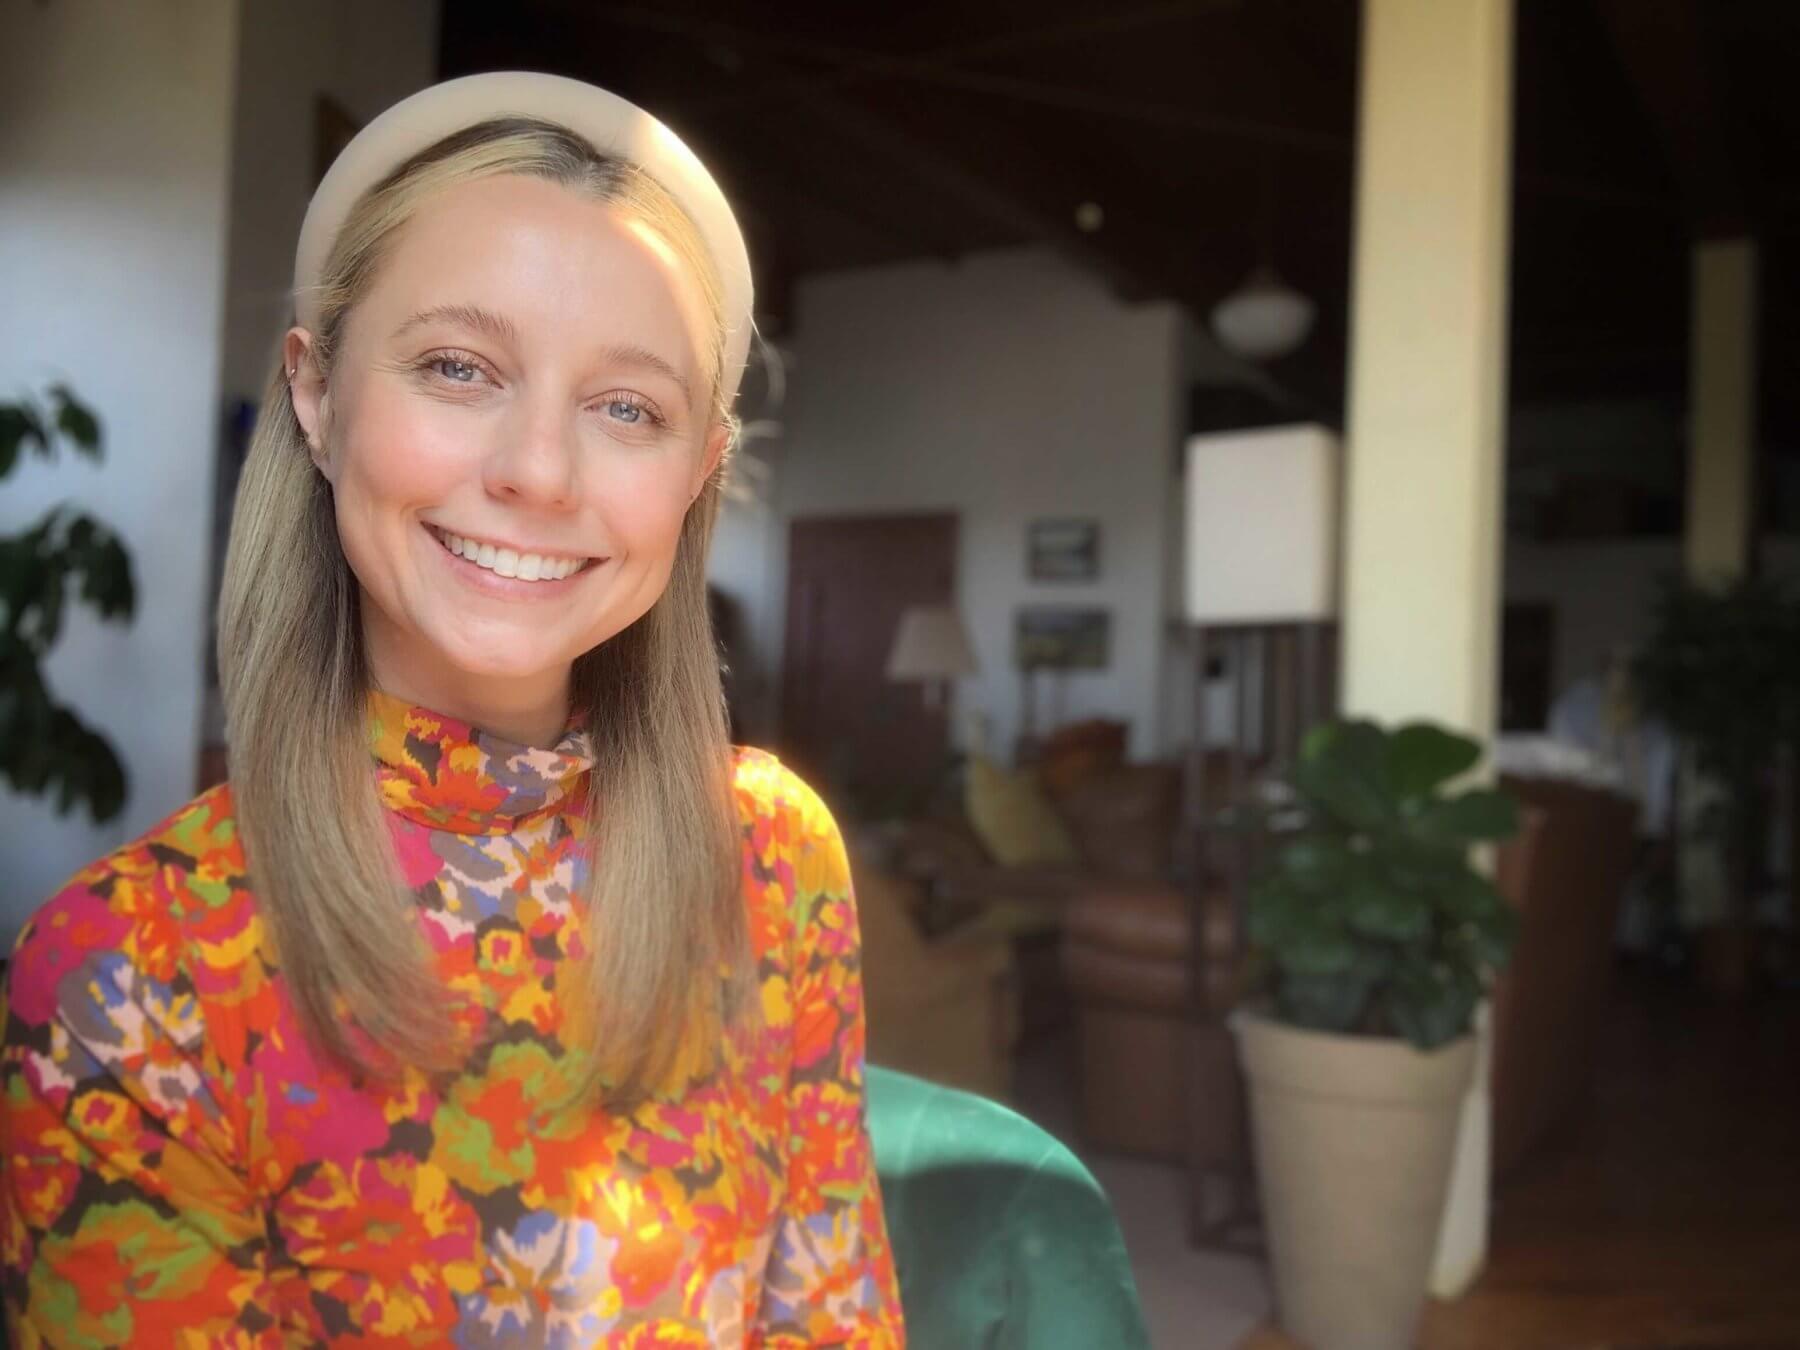 Kayla Mackie wears a floral orange top and smiles for the camera in her home office.